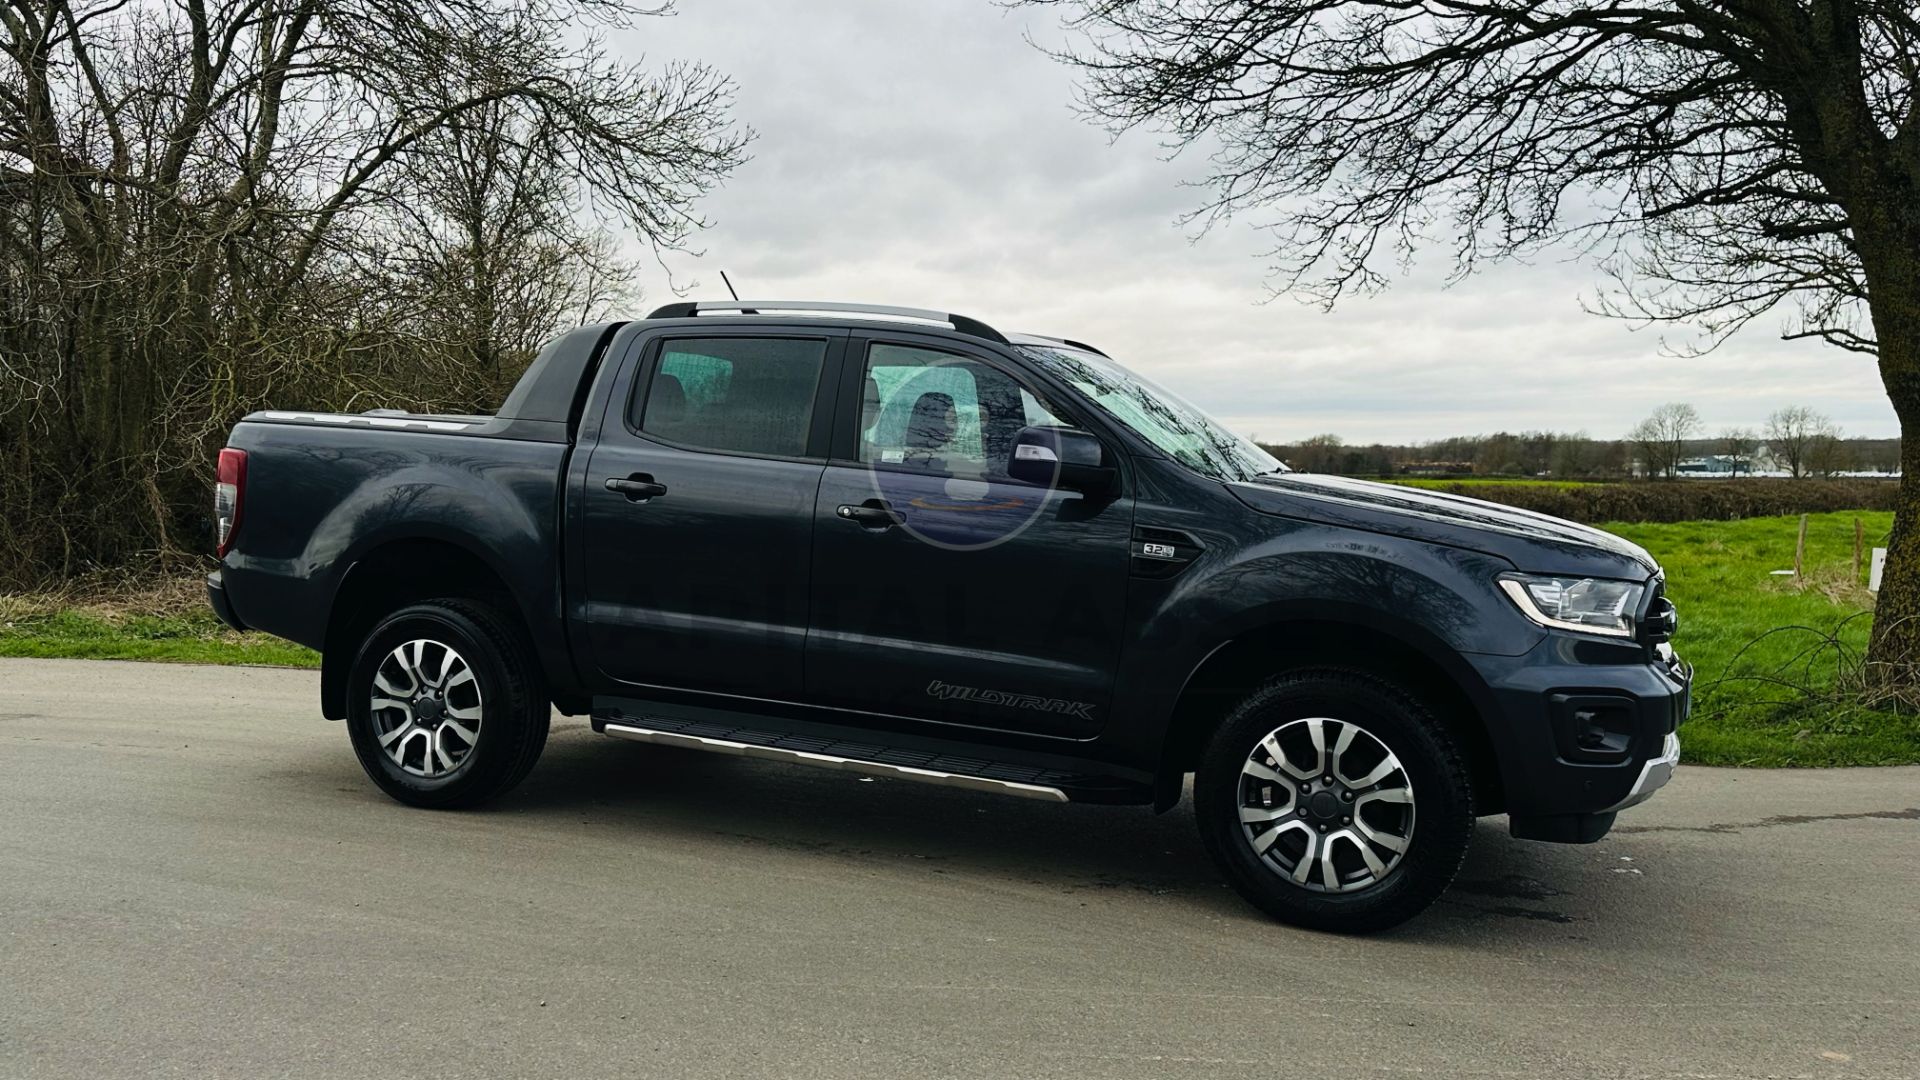 FORD RANGER *WILDTRAK EDITION* DOUBLE CAB PICK-UP (2020 - EURO 6) 3.2 TDCI - AUTOMATIC *HUGE SPEC*